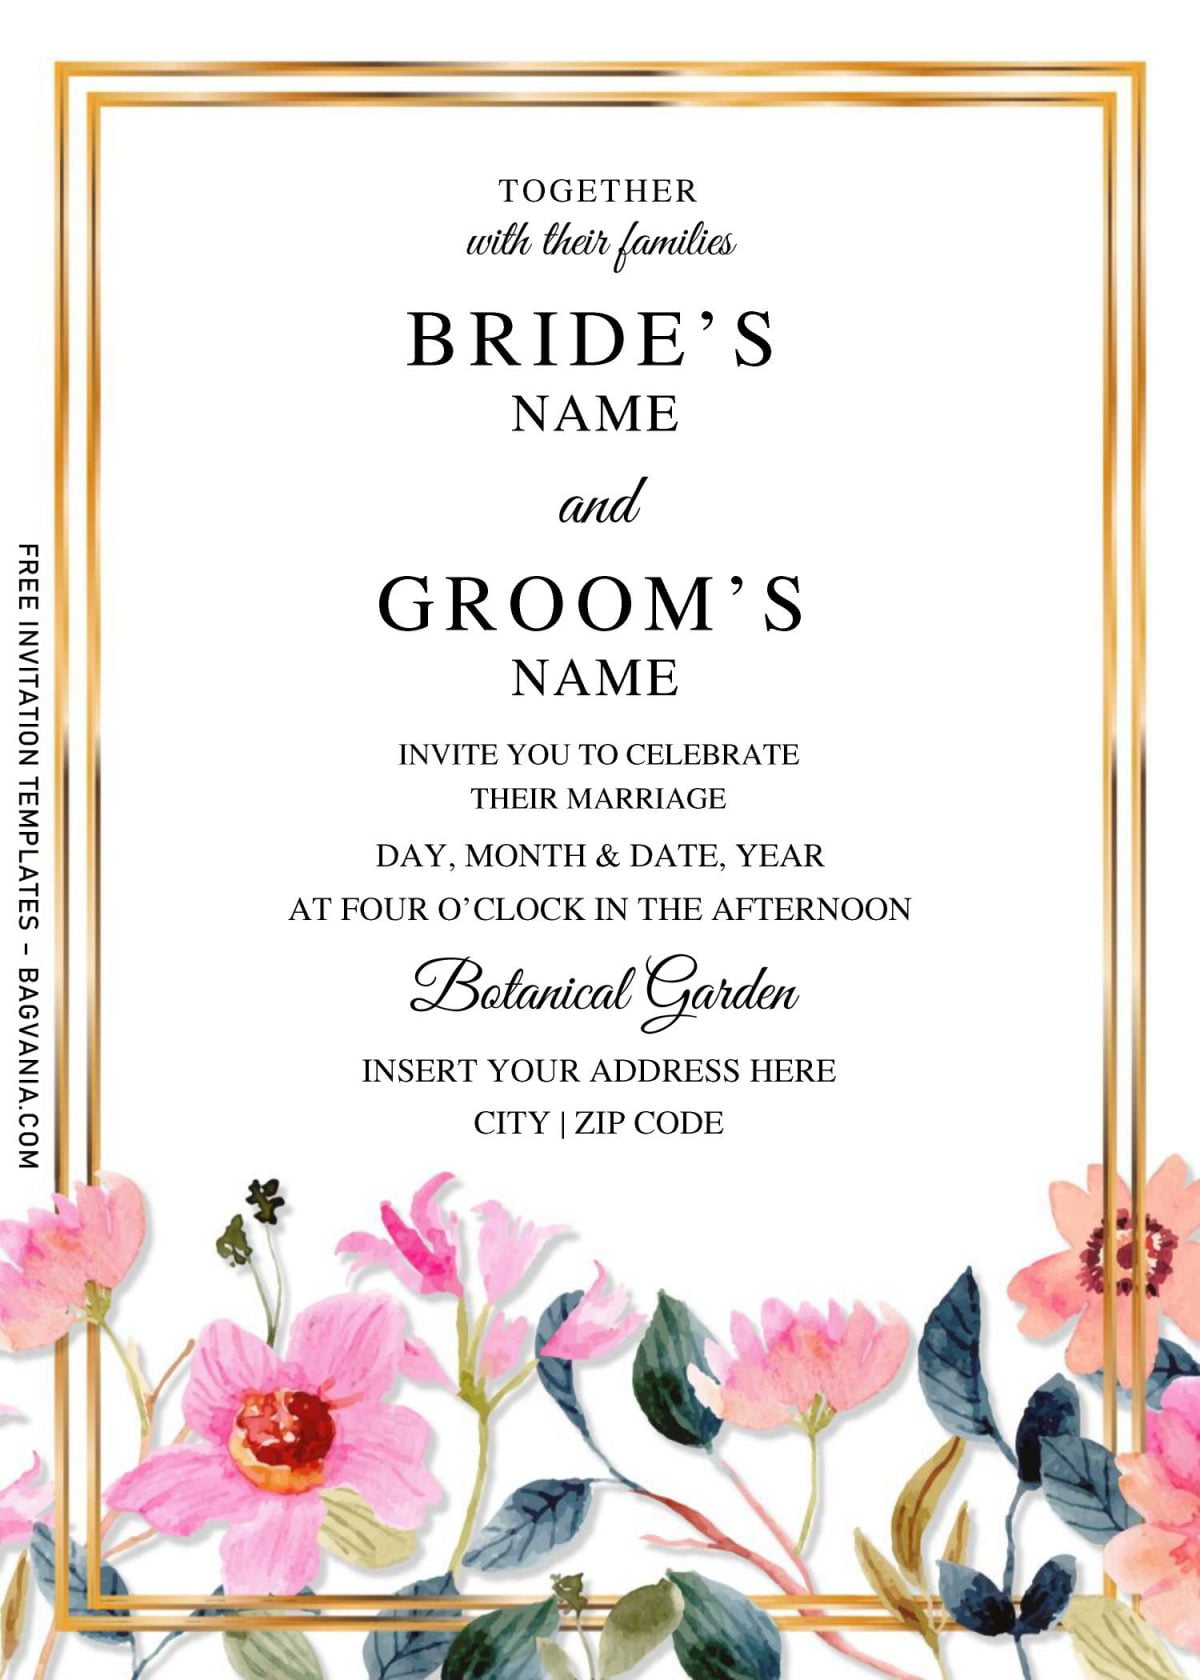 Free Peach Flower Wedding Invitation Templates For Word and has classy and elegant vintage script font styles